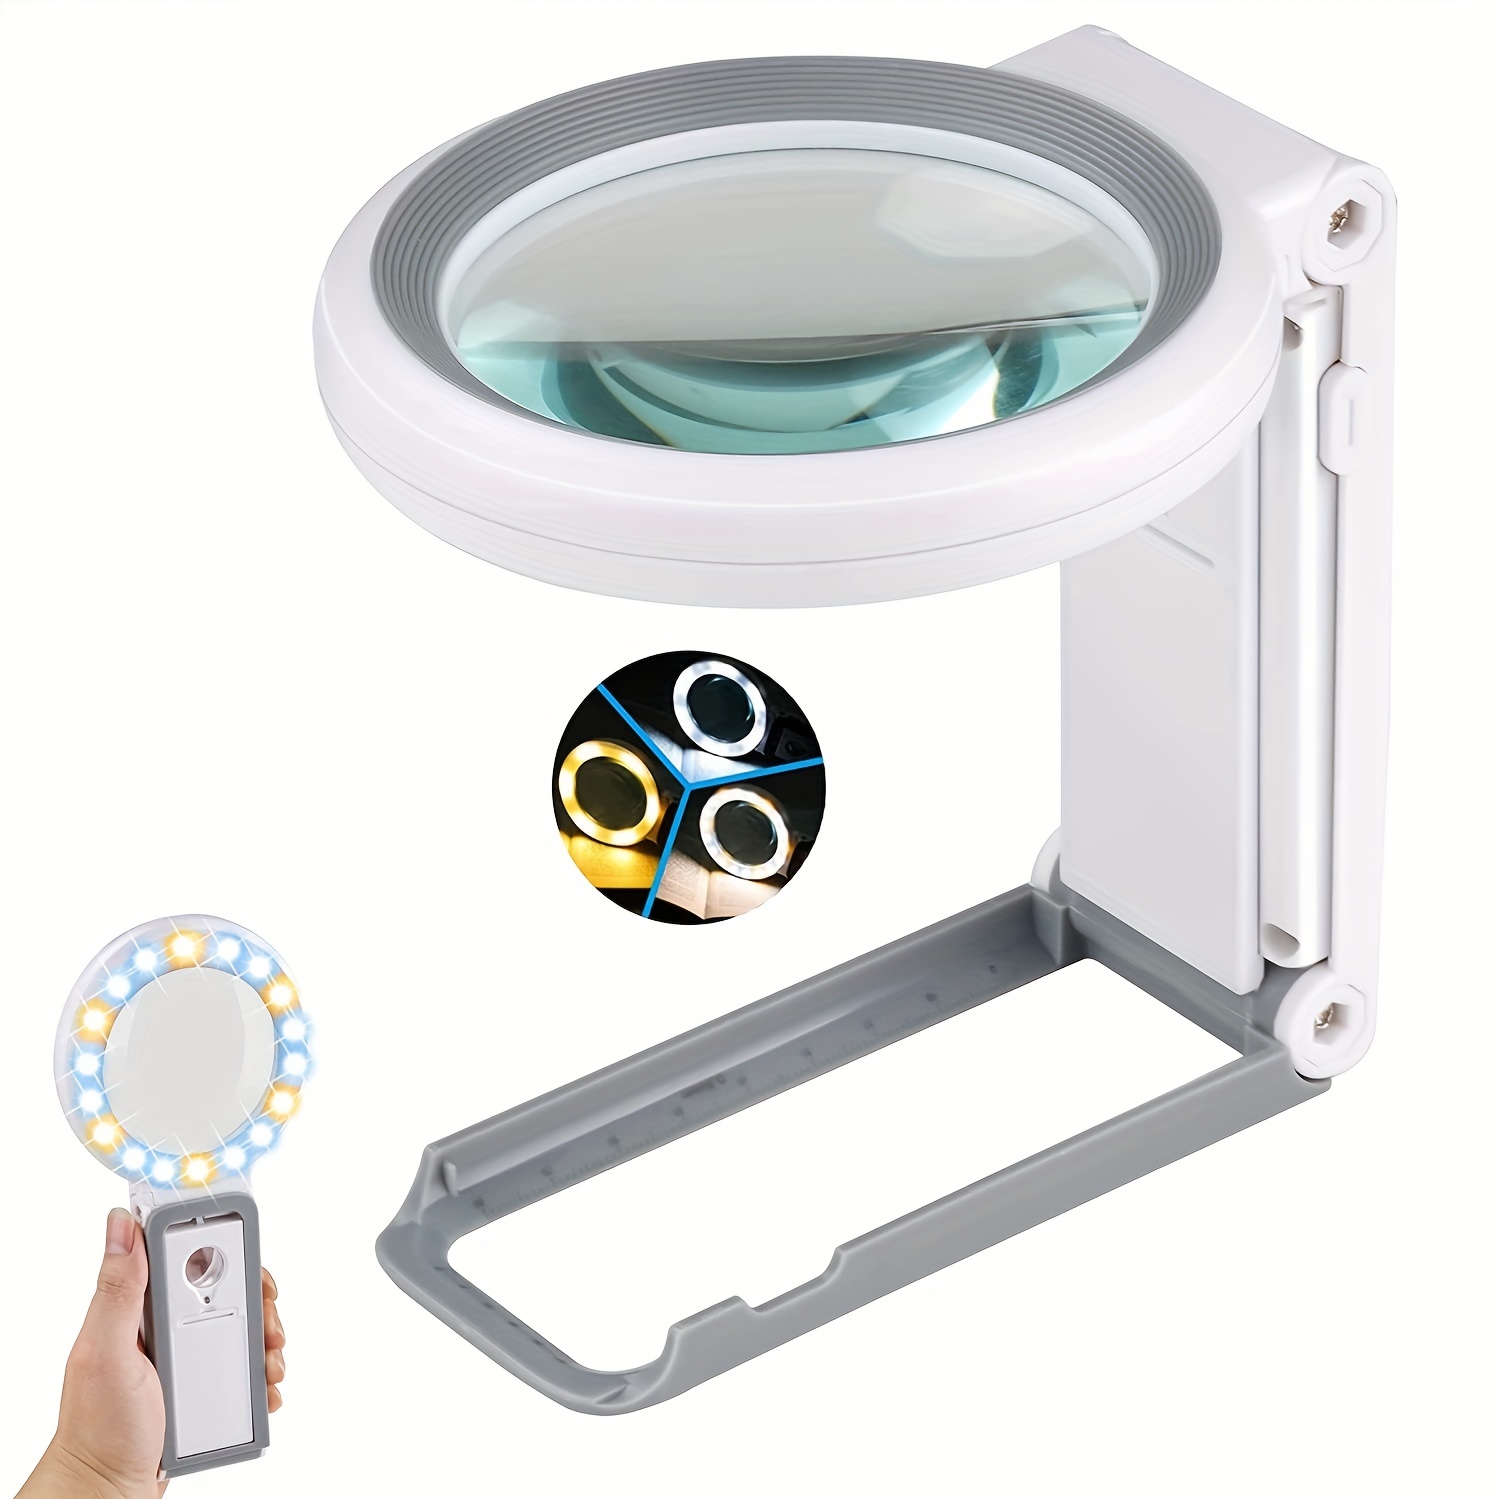 10X Beauty Magnifying Lamp with Light Stand Illuminated Magnifier